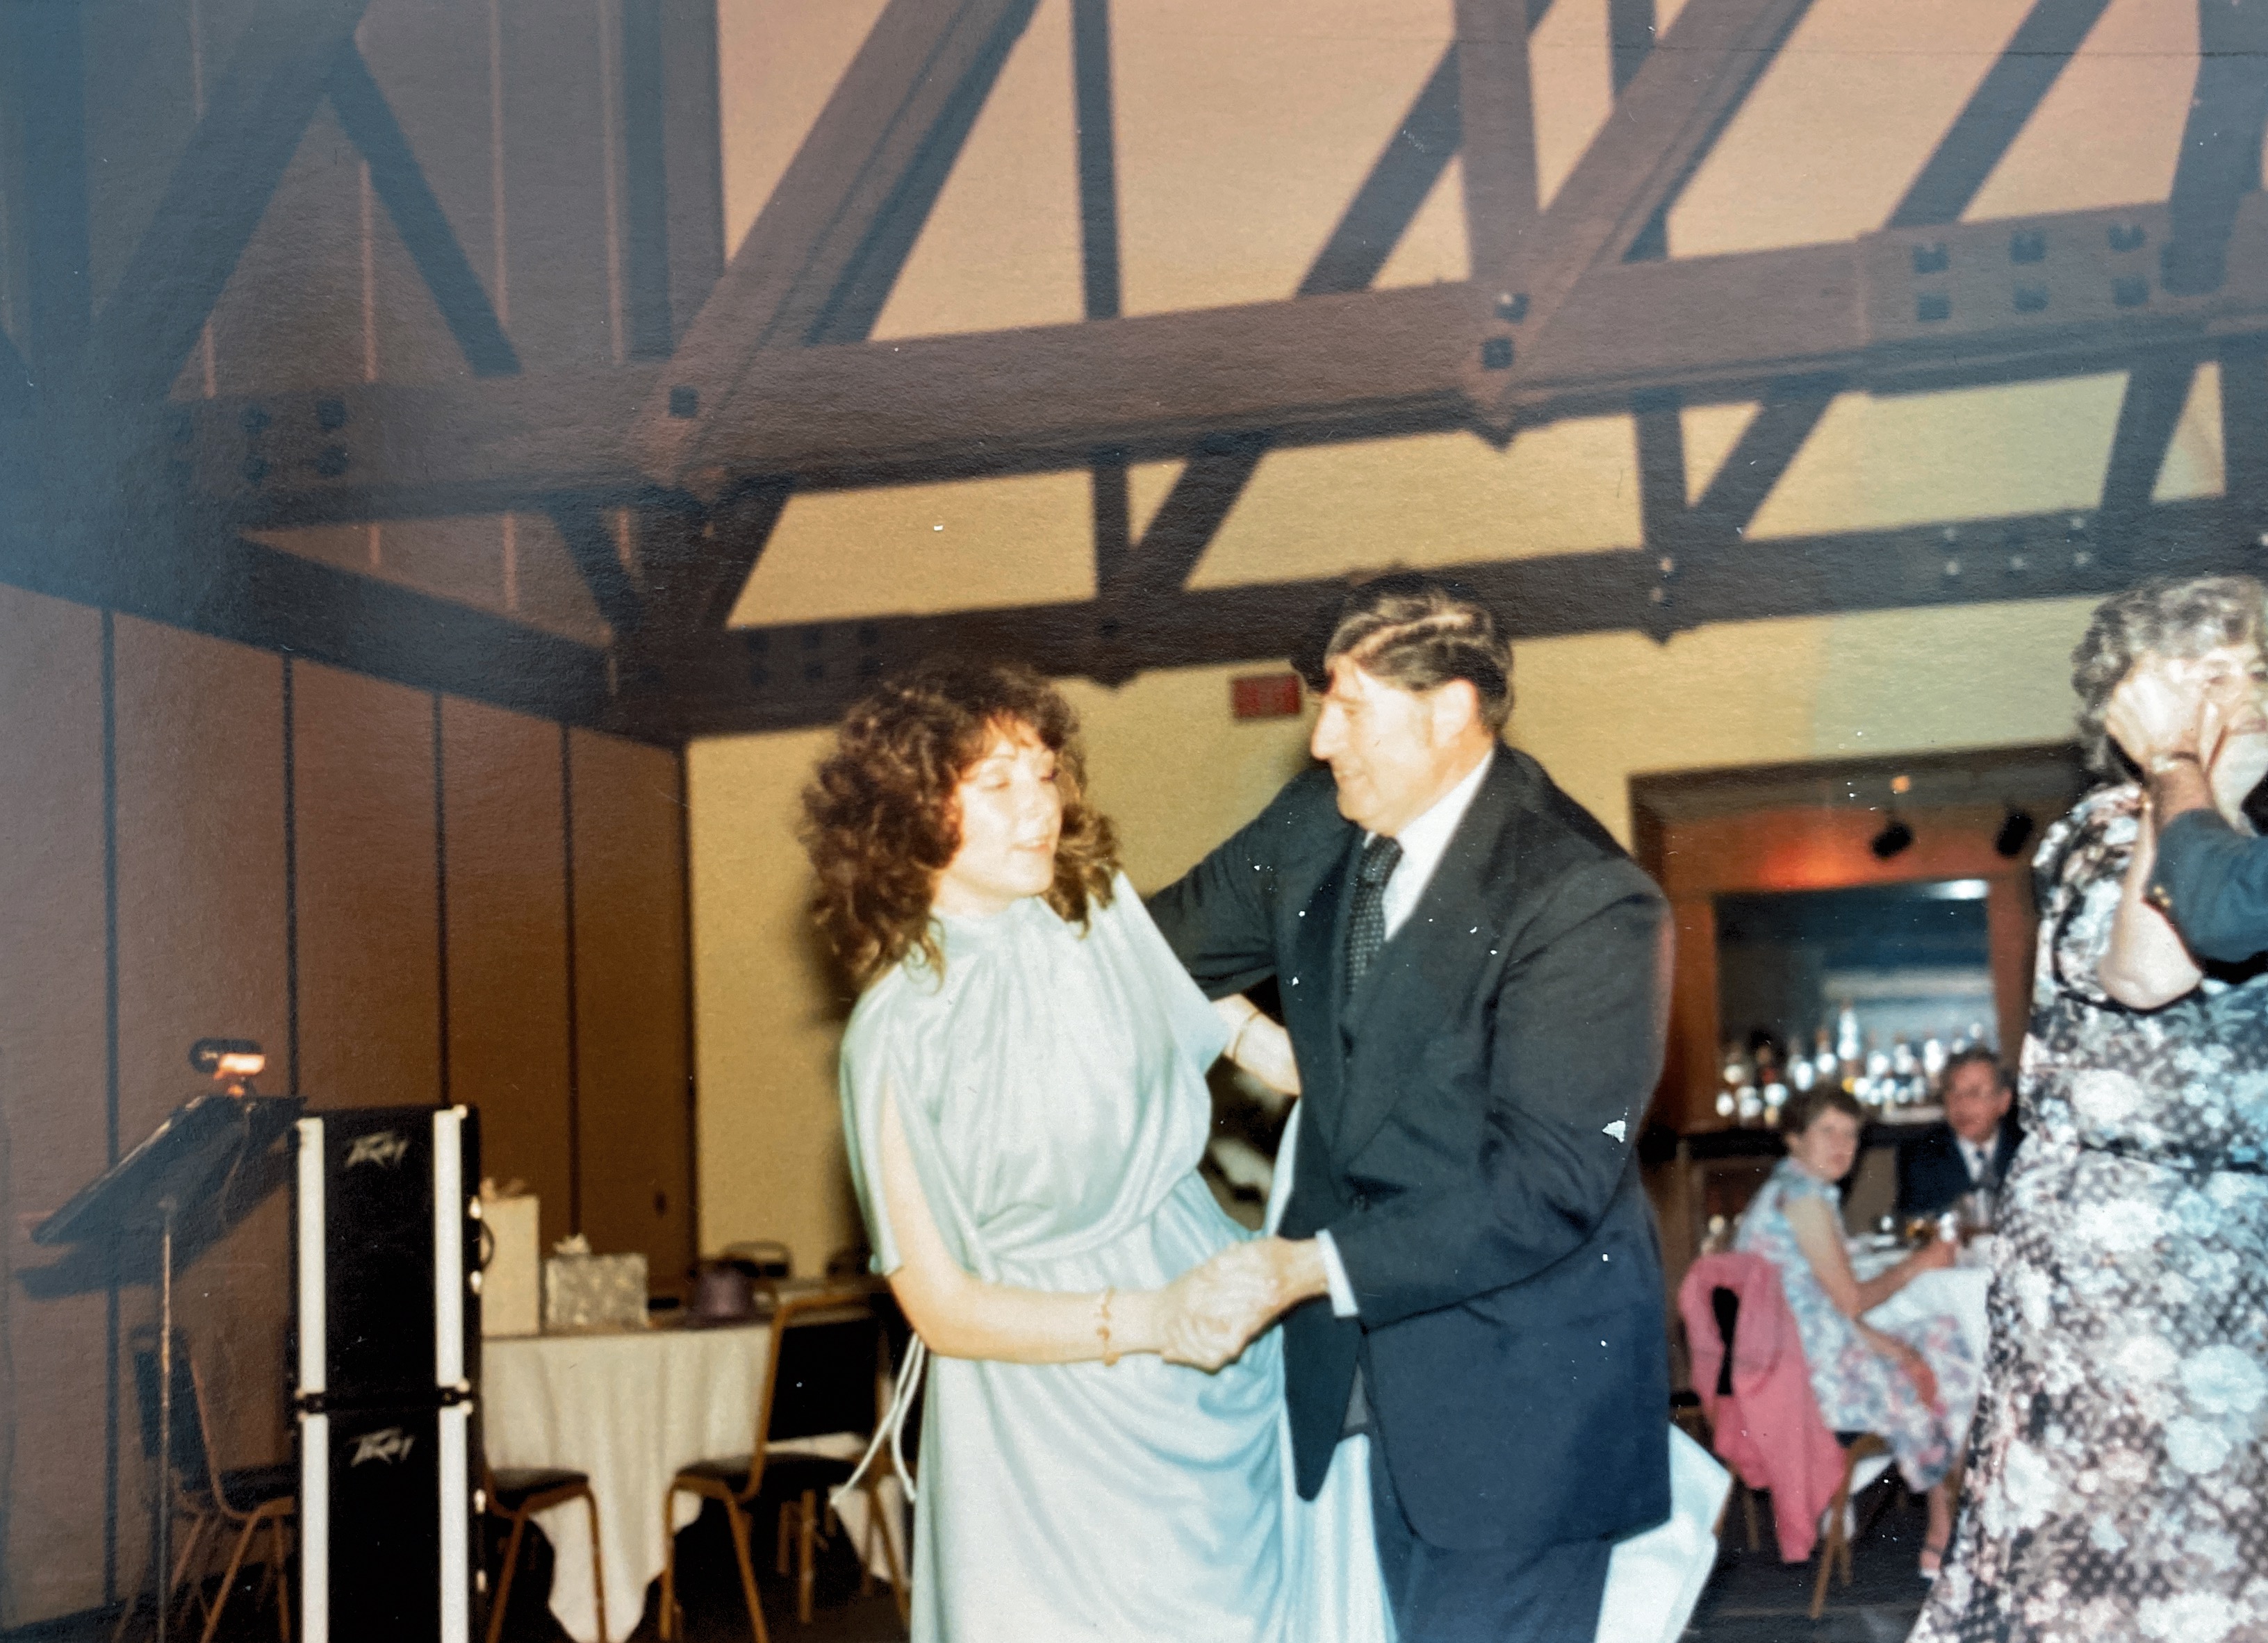 Polka with Mr Conklin at Cathy’s wedding 1981